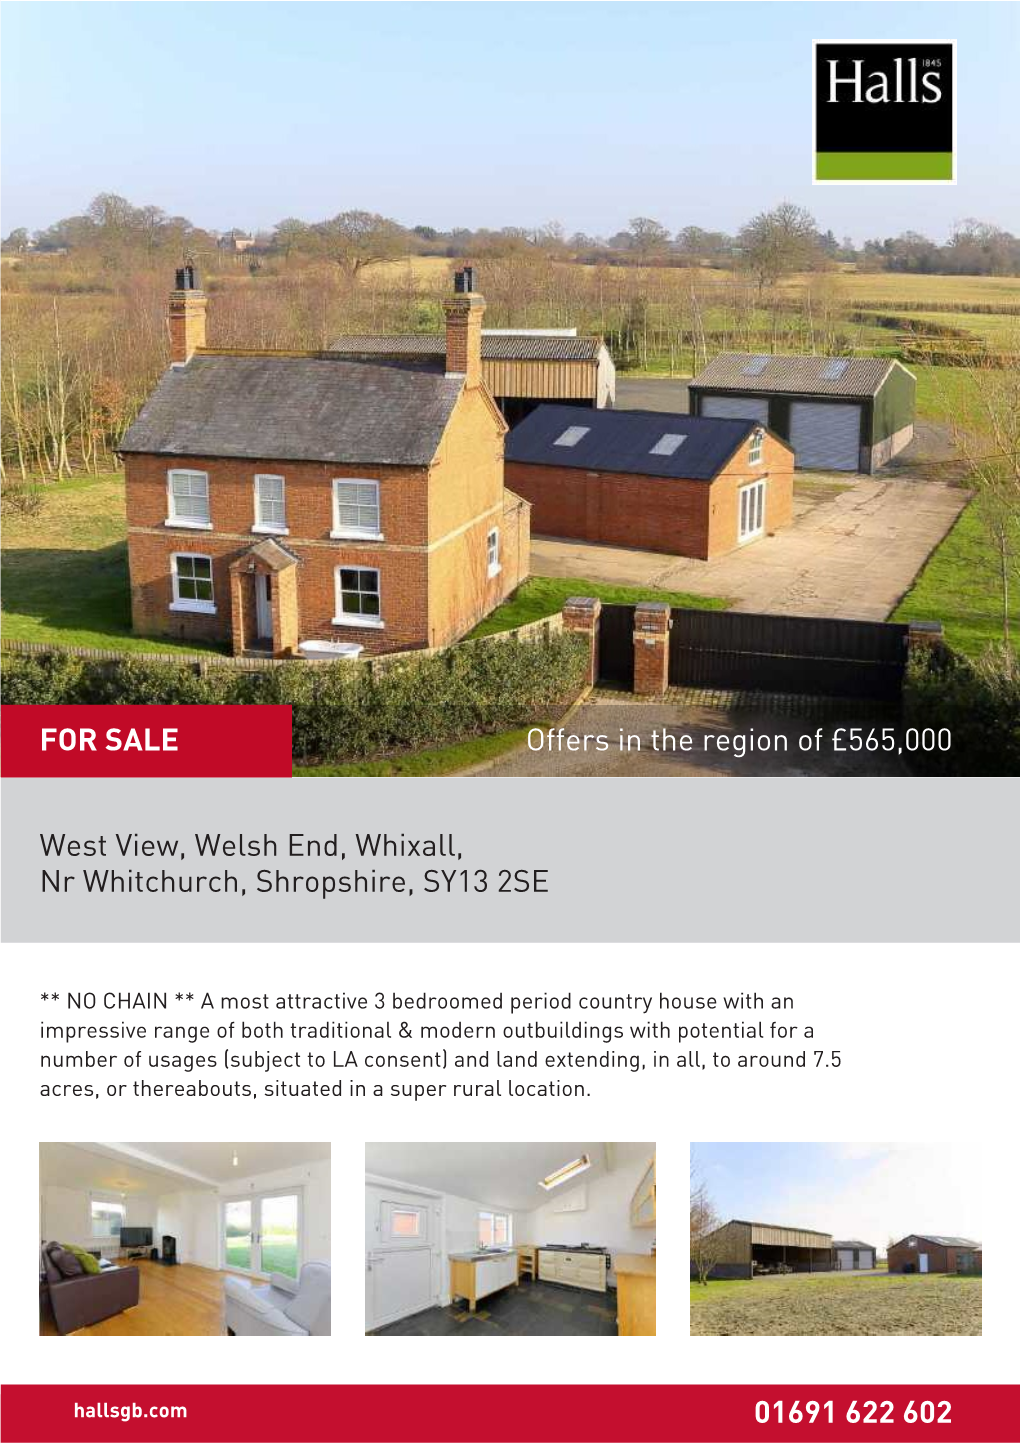 West View, Welsh End, Whixall, Nr Whitchurch, Shropshire, SY13 2SE